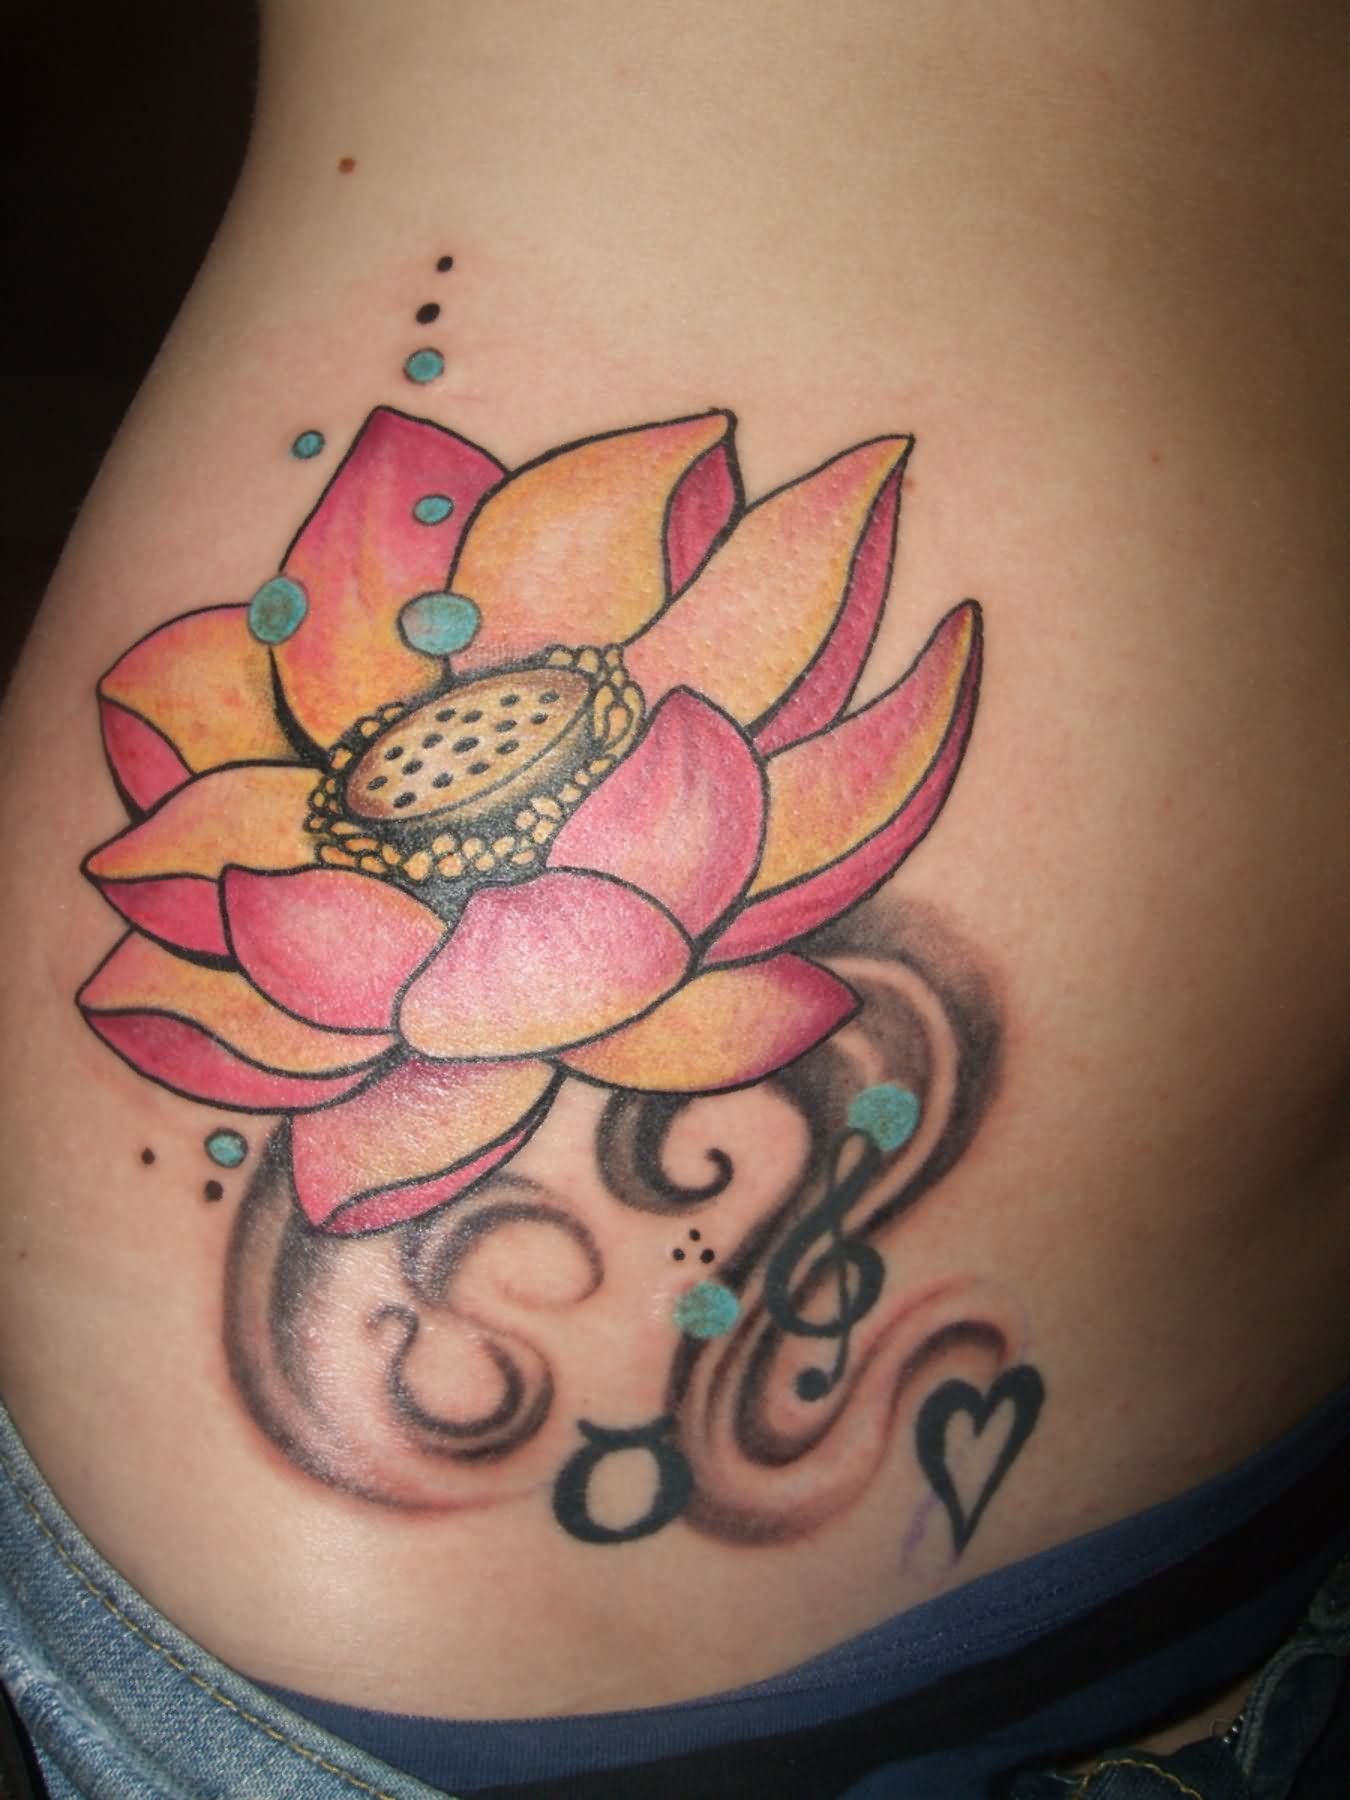 Cool Lotus Flower In Water Tattoo On Hip